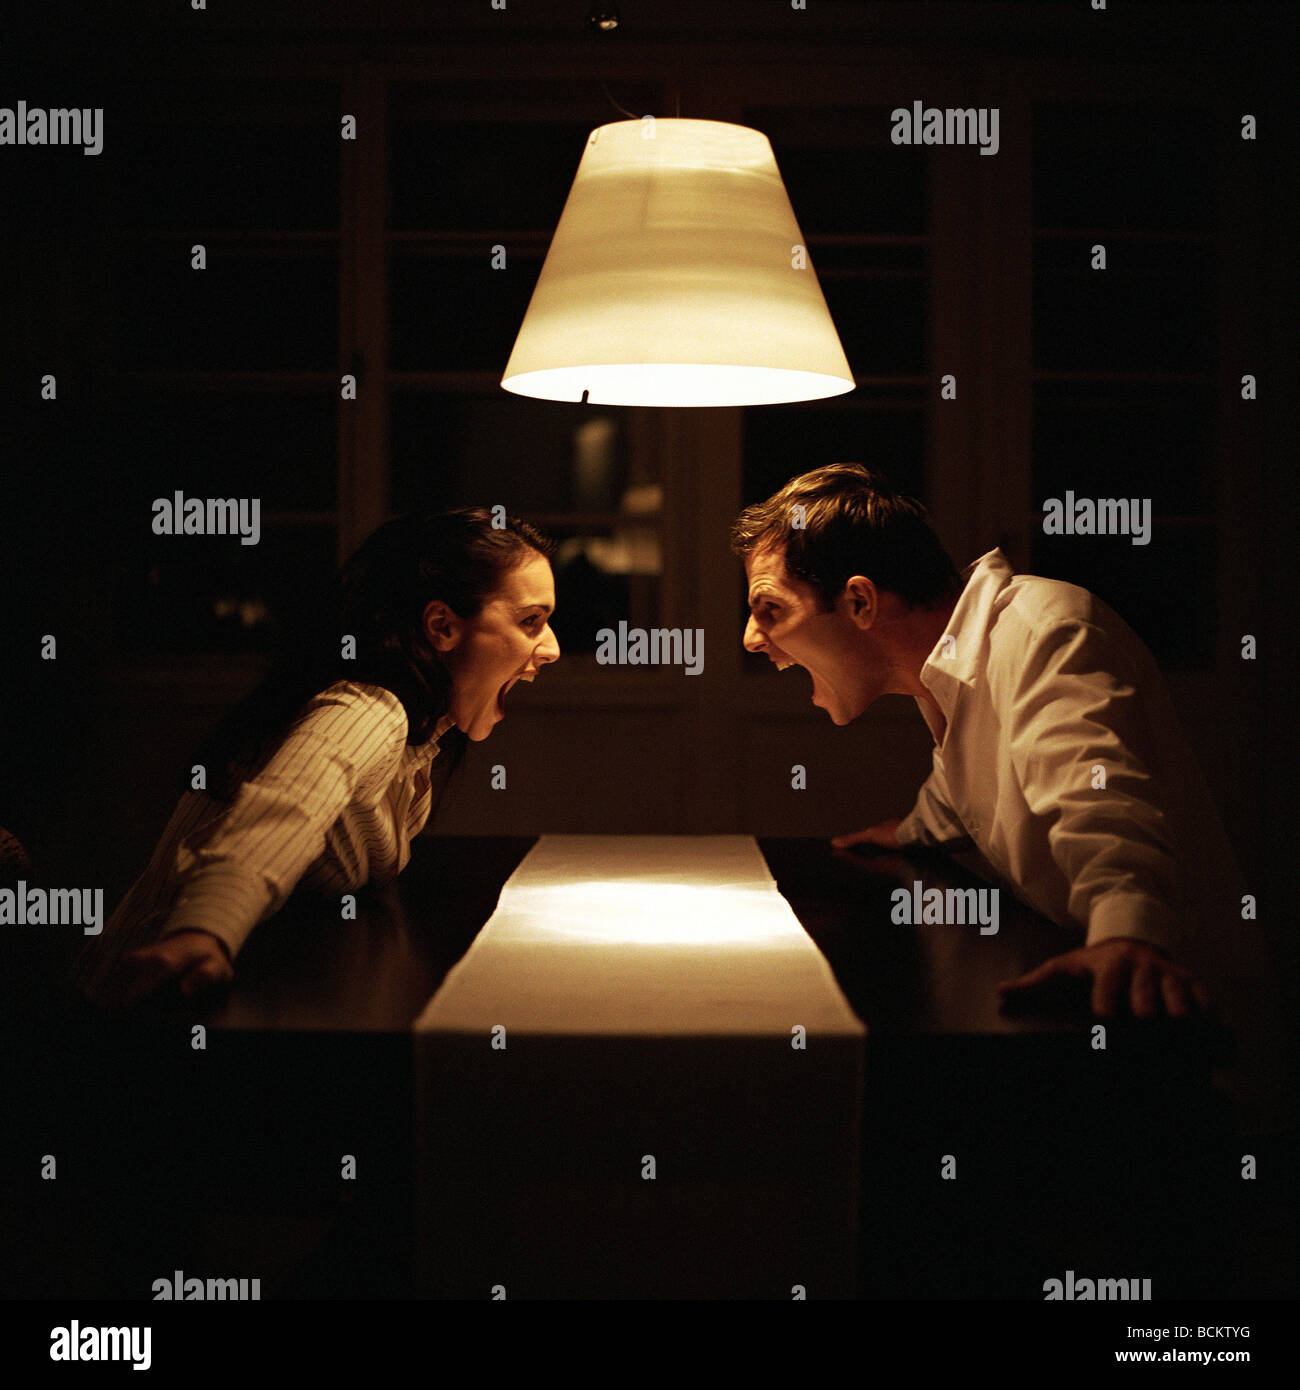 Man and woman face to face at table, screaming at each other Stock Photo